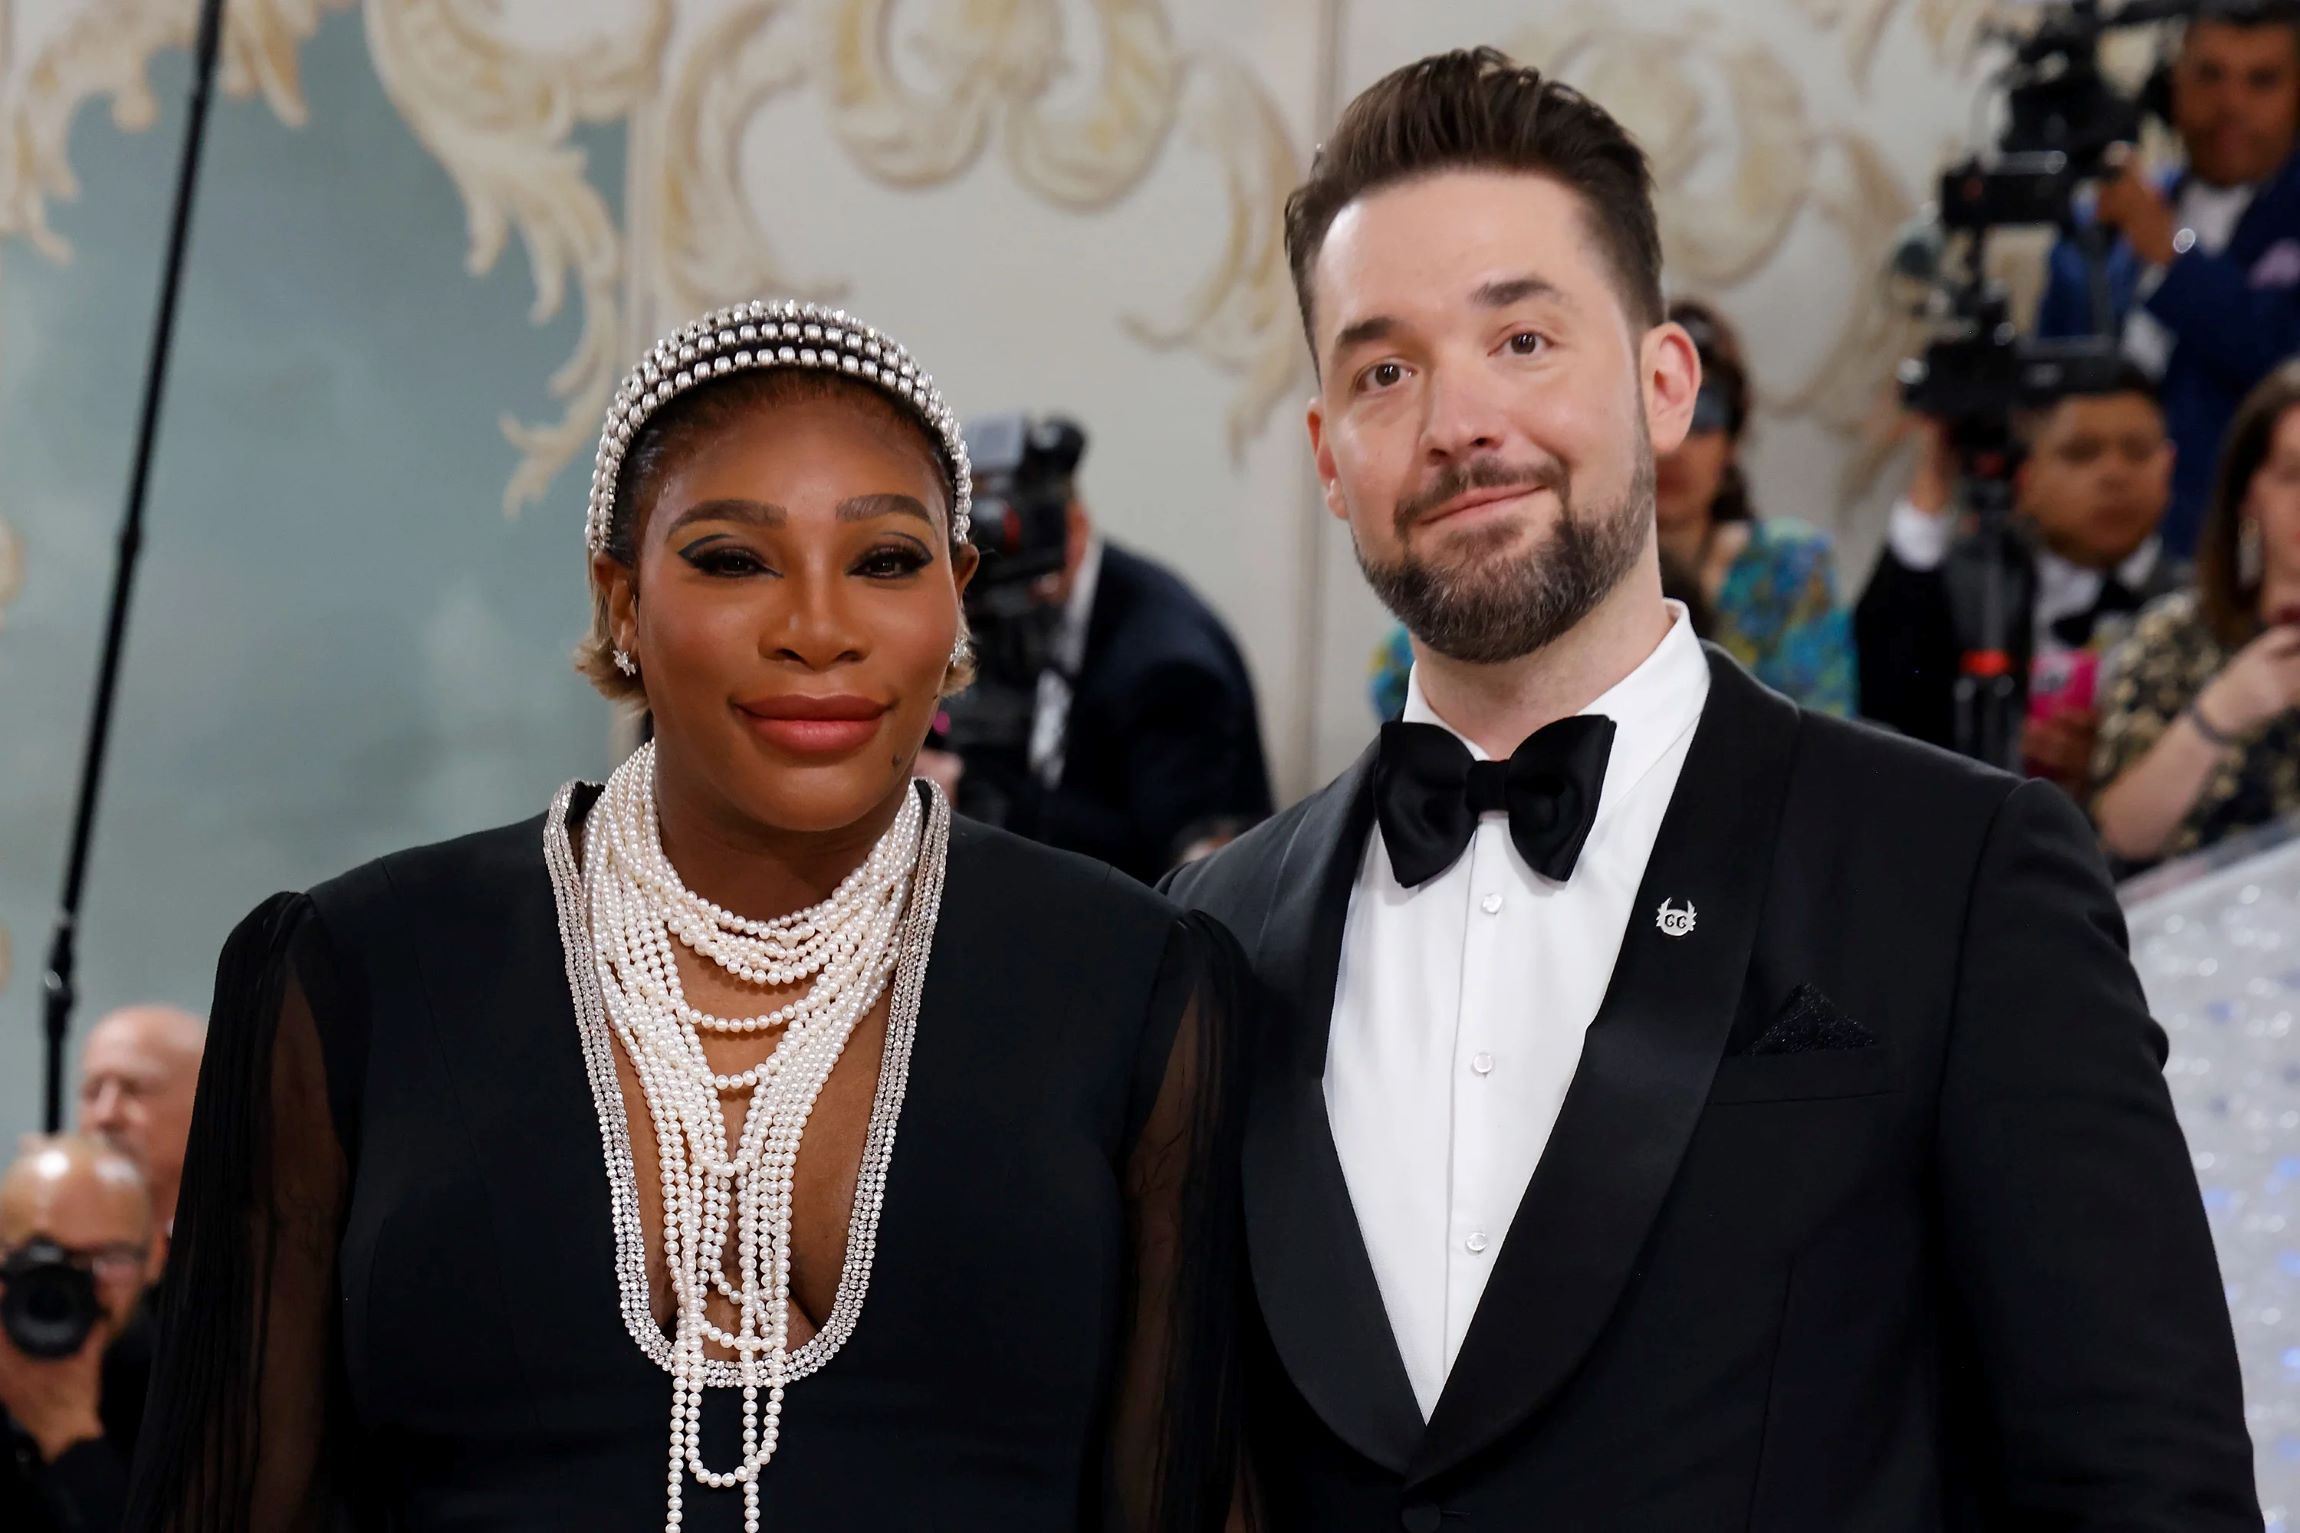 Serena Williams And Husband Alexis Ohanian Make A Special Appearance In Daughter’s ‘Nutcracker’ Ballet Play